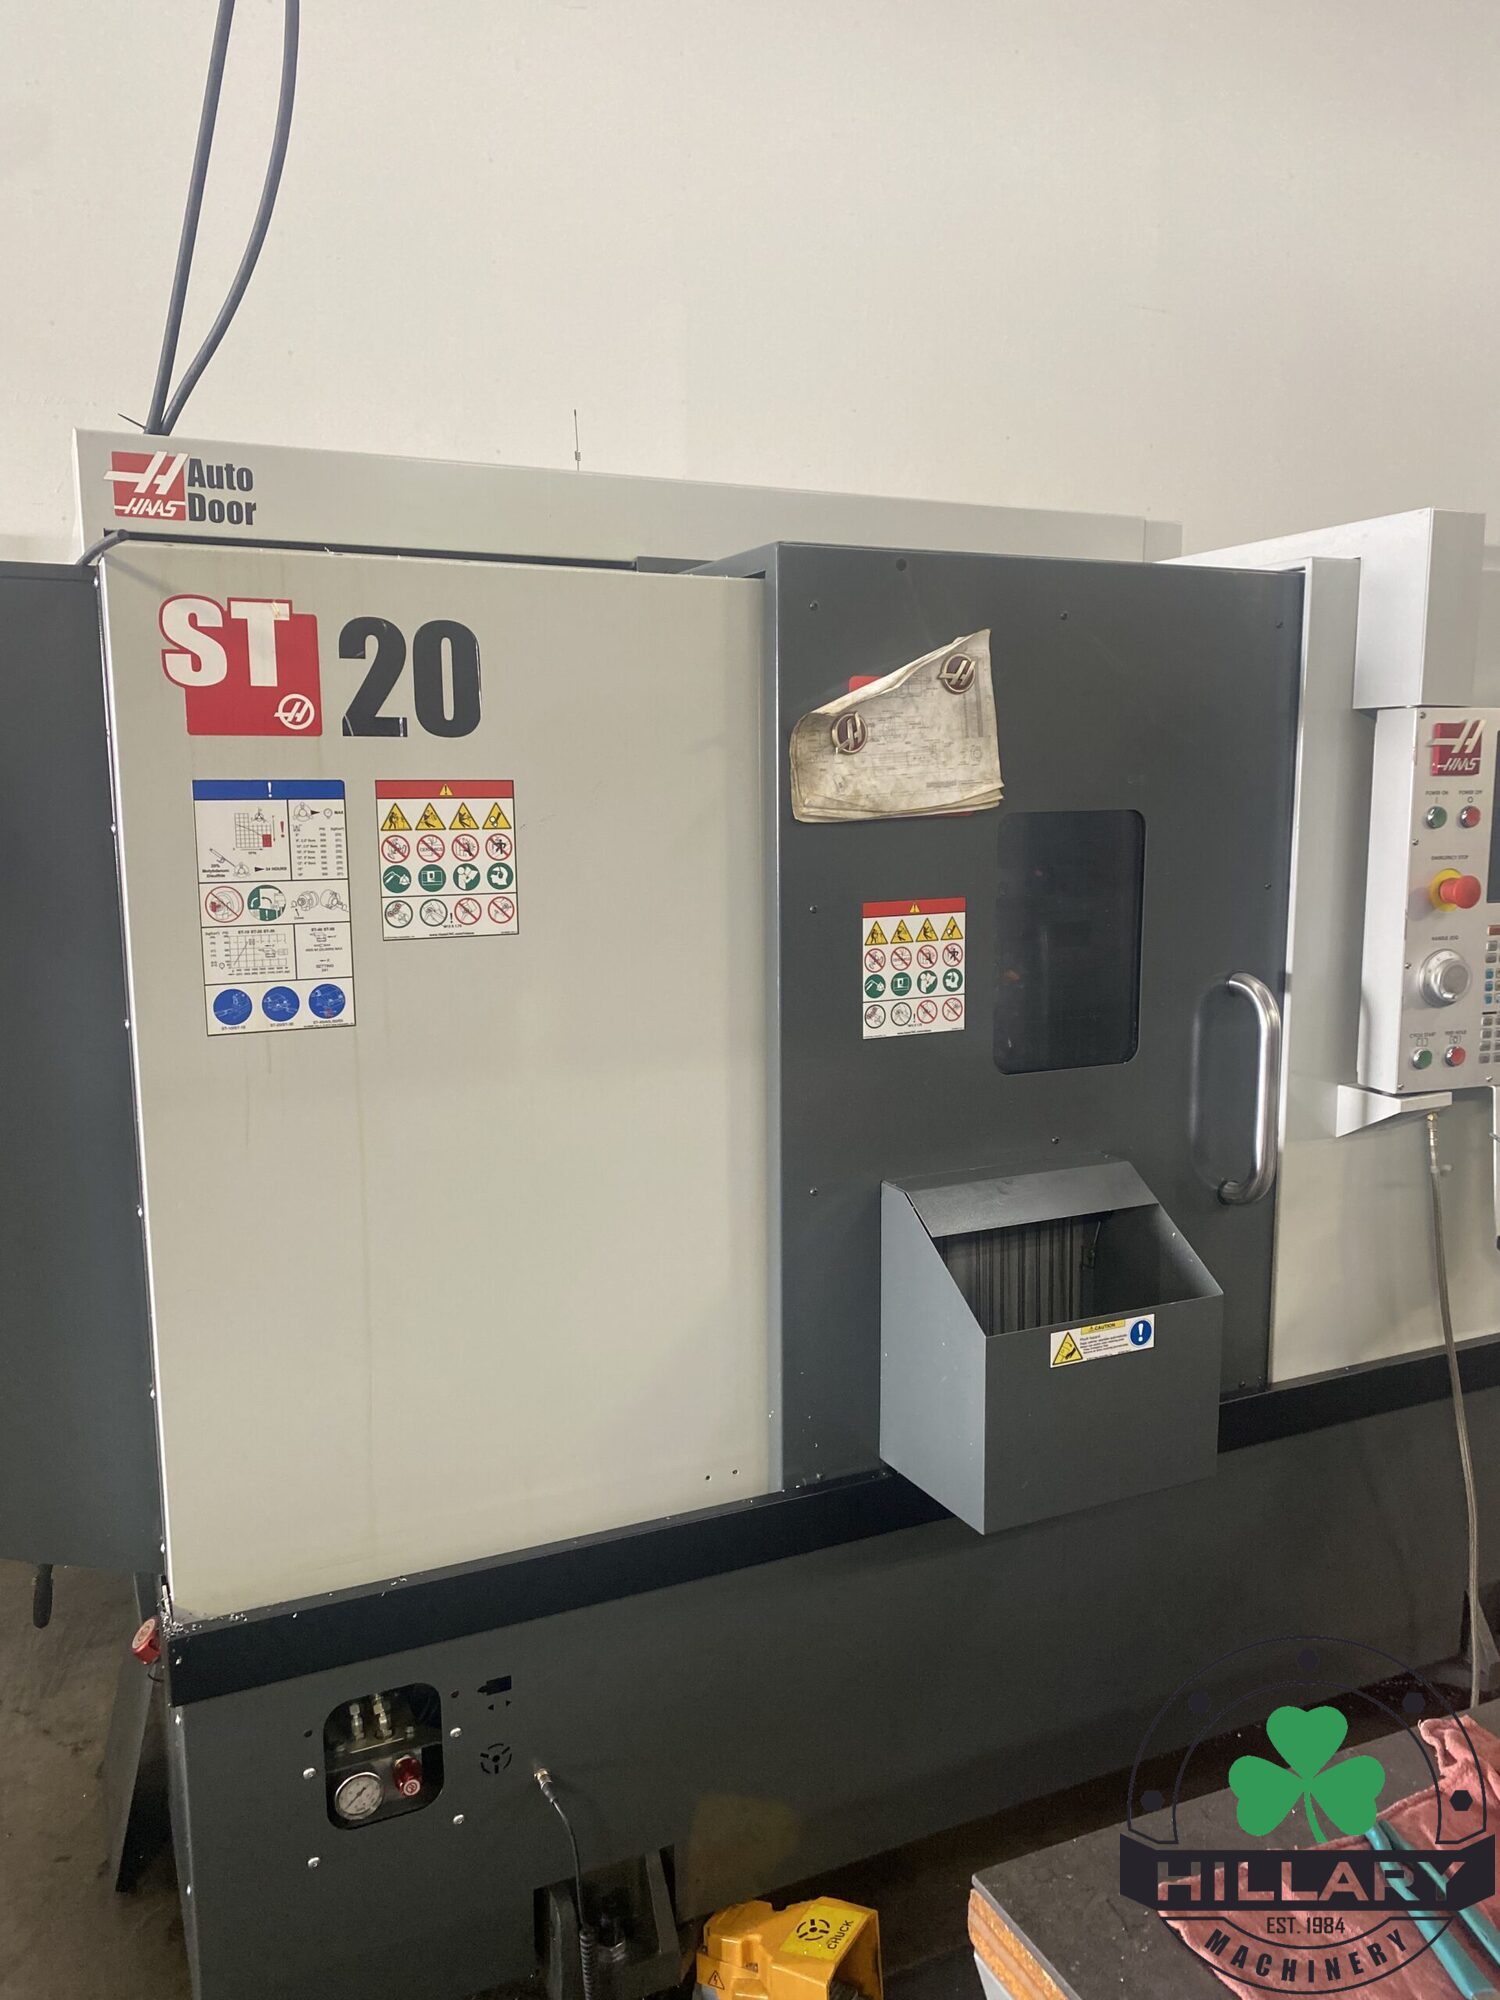 2020 HAAS ST-20 2-Axis CNC Lathes | Hillary Machinery